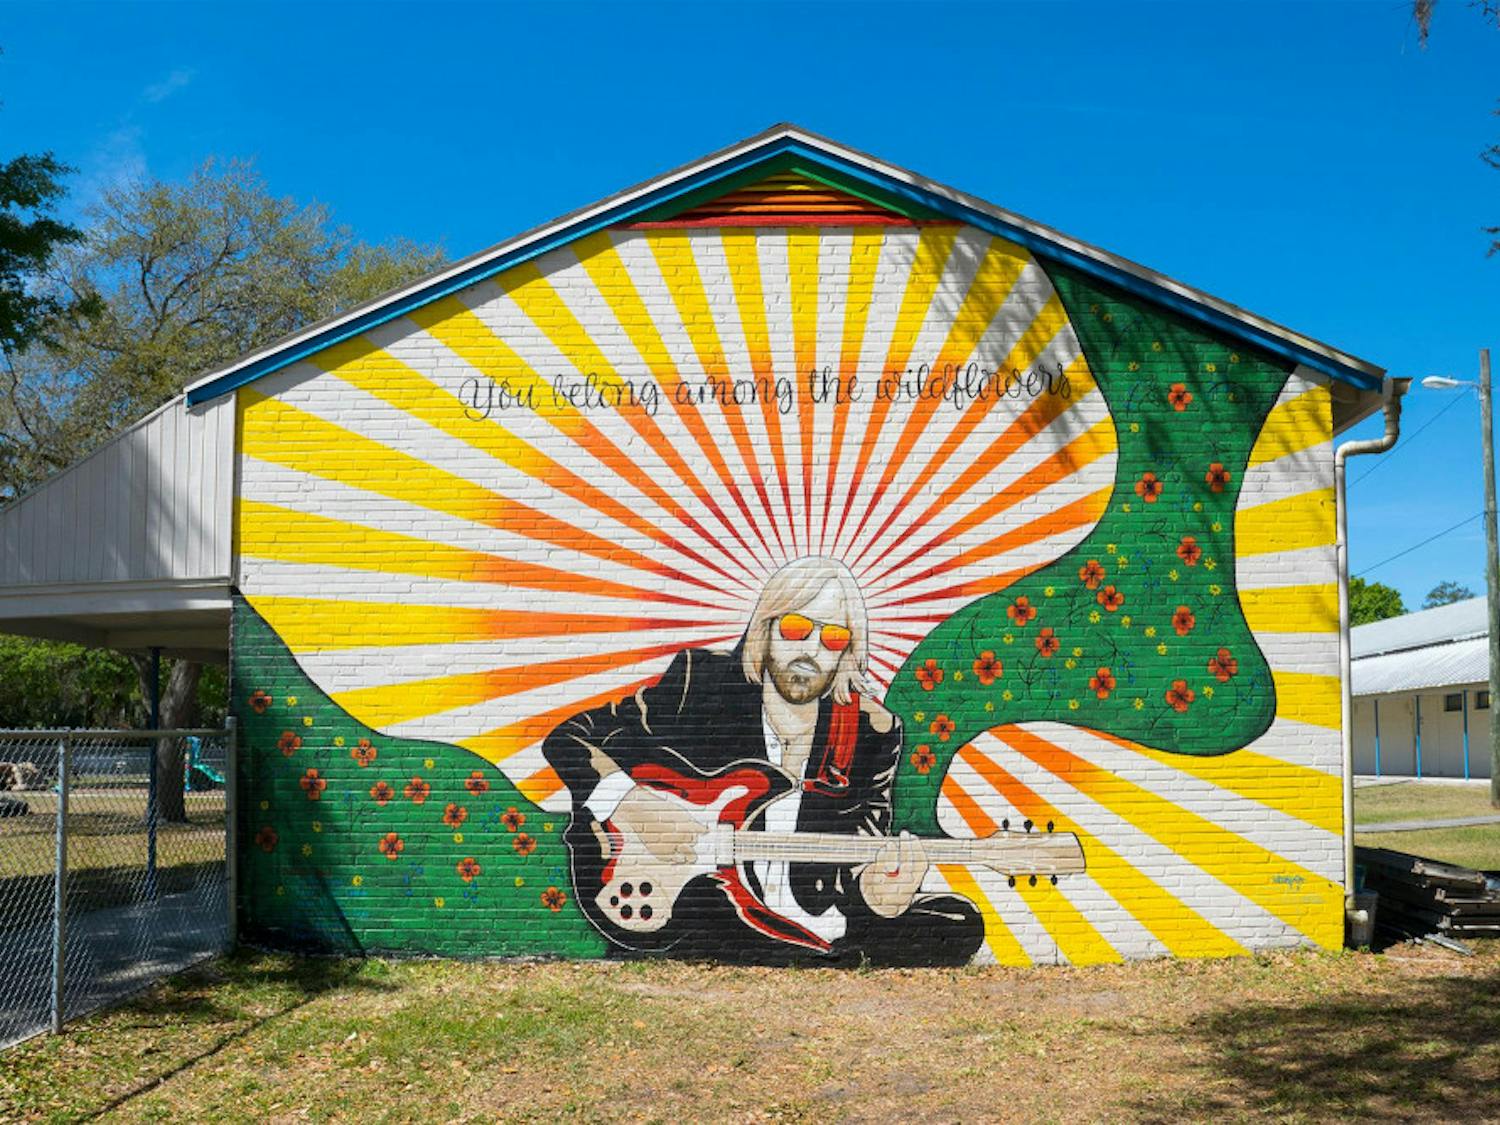 The owners of Visionary CrossFit, Carrie Martinez and Jesus Martinez, painted a Tom Petty tribute mural as a gift to Sidney Lanier Center.